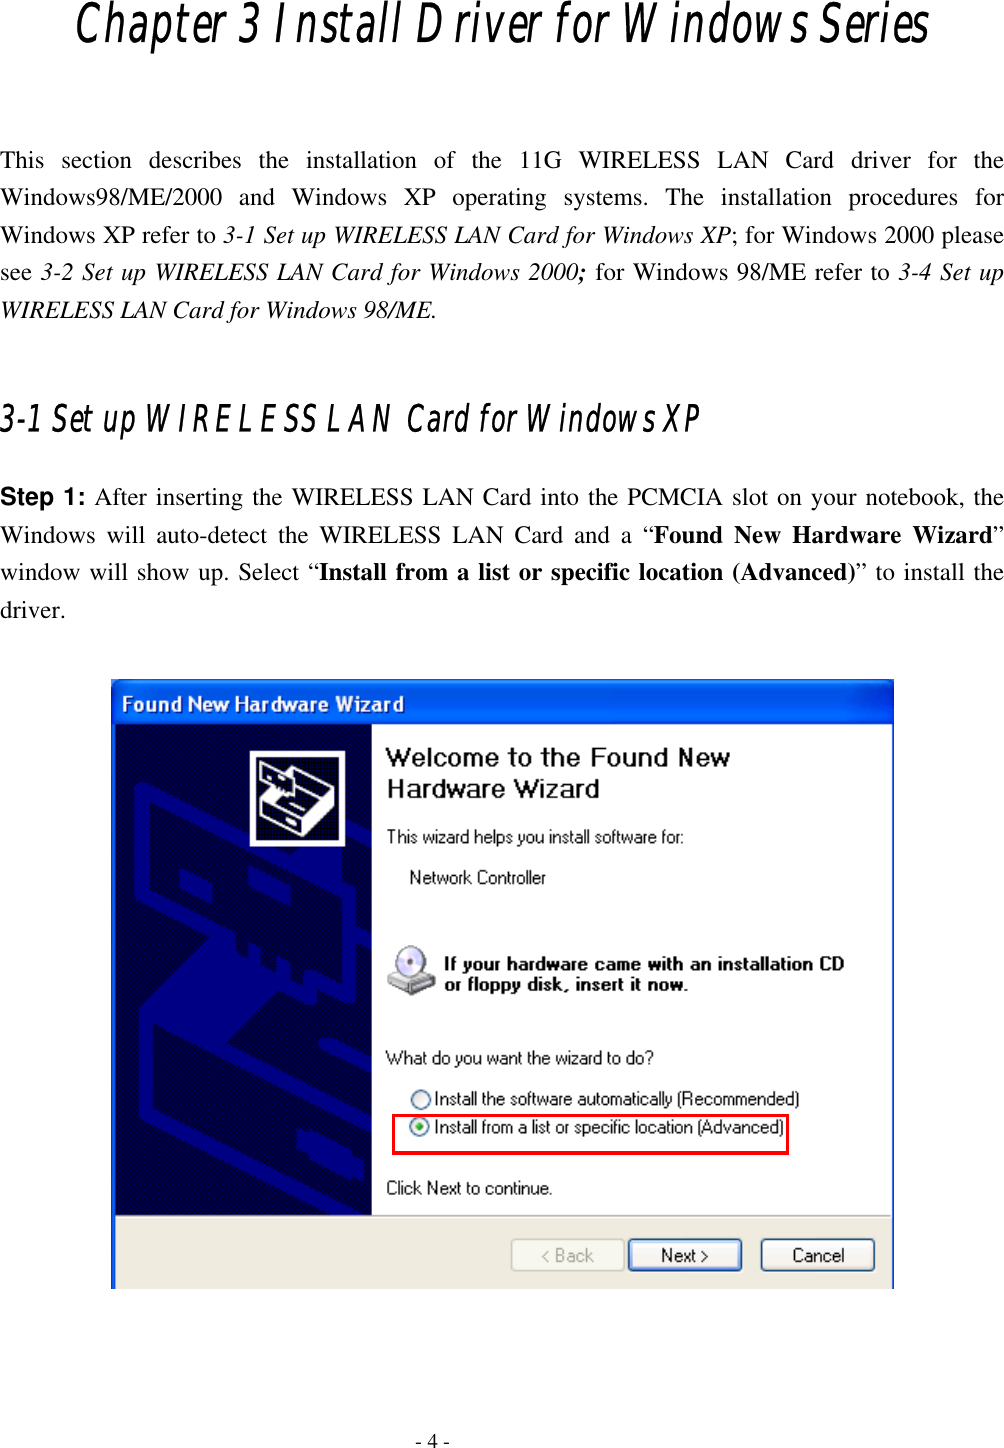    - 4 - Chapter 3 Install Driver for Windows Series  This section describes the installation of the 11G WIRELESS LAN Card driver for the Windows98/ME/2000 and Windows XP operating systems. The installation procedures for Windows XP refer to 3-1 Set up WIRELESS LAN Card for Windows XP; for Windows 2000 please see 3-2 Set up WIRELESS LAN Card for Windows 2000; for Windows 98/ME refer to 3-4 Set up WIRELESS LAN Card for Windows 98/ME.  3-1 Set up WIRELESS LAN Card for Windows XP Step 1: After inserting the WIRELESS LAN Card into the PCMCIA slot on your notebook, the Windows will auto-detect the WIRELESS LAN Card and a “Found New Hardware Wizard” window will show up. Select “Install from a list or specific location (Advanced)” to install the driver.     